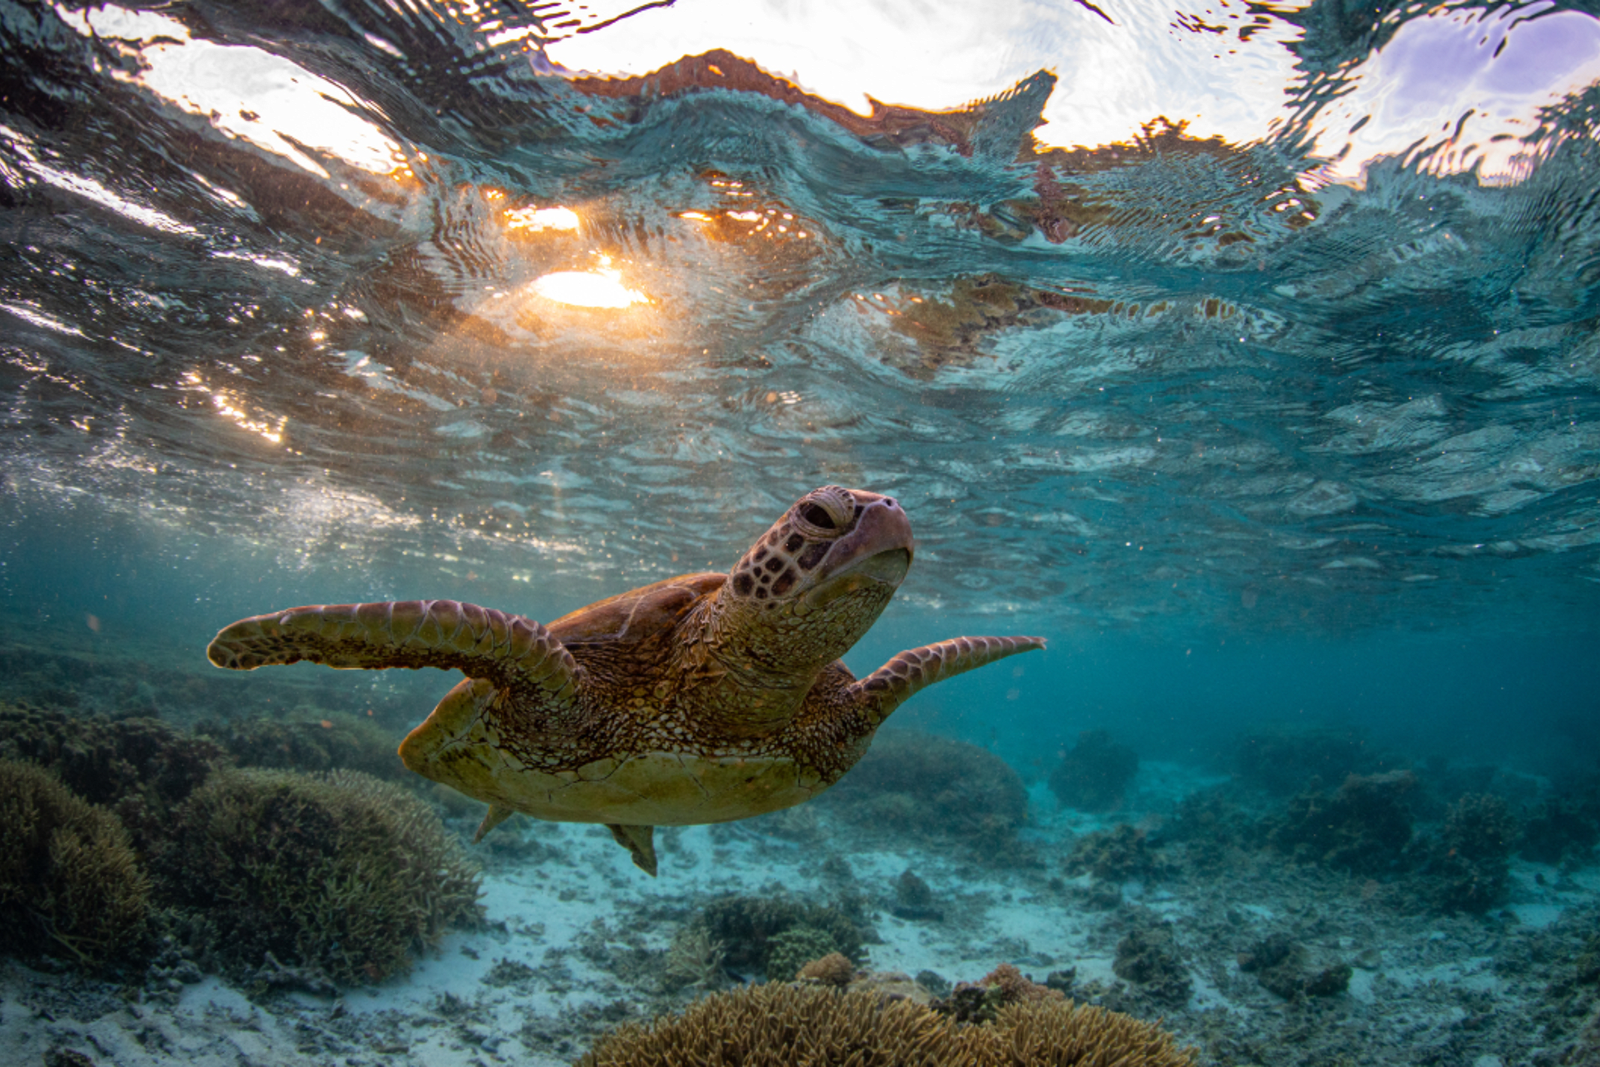 Turtle swimming underwater in the Great Barrier Reef